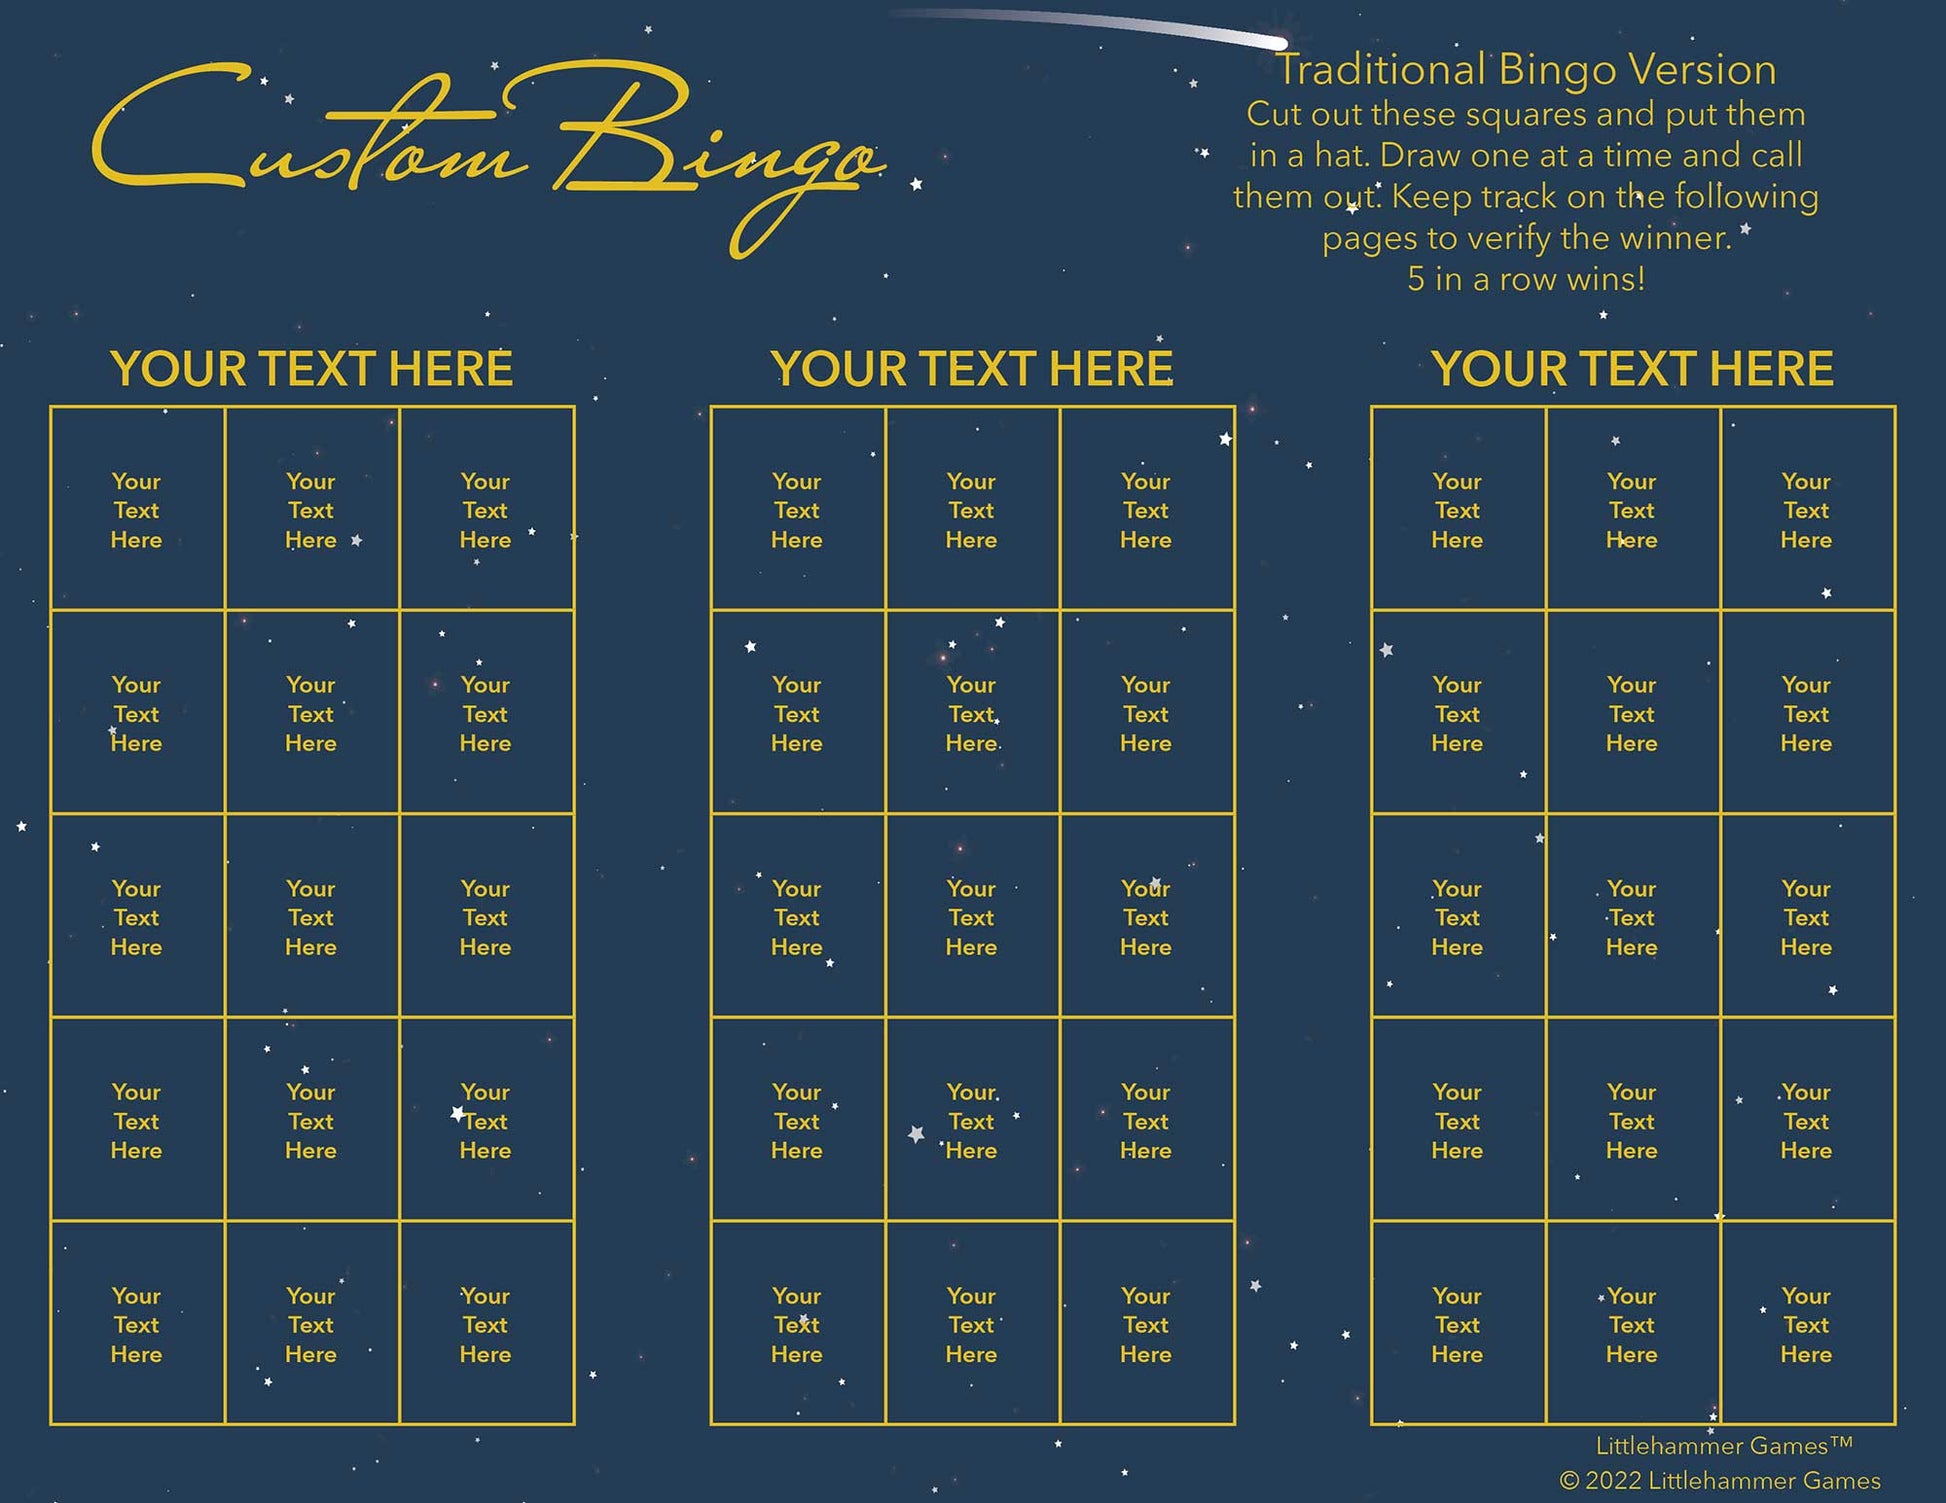 Custom Bingo calling card with gold text on a shooting star background